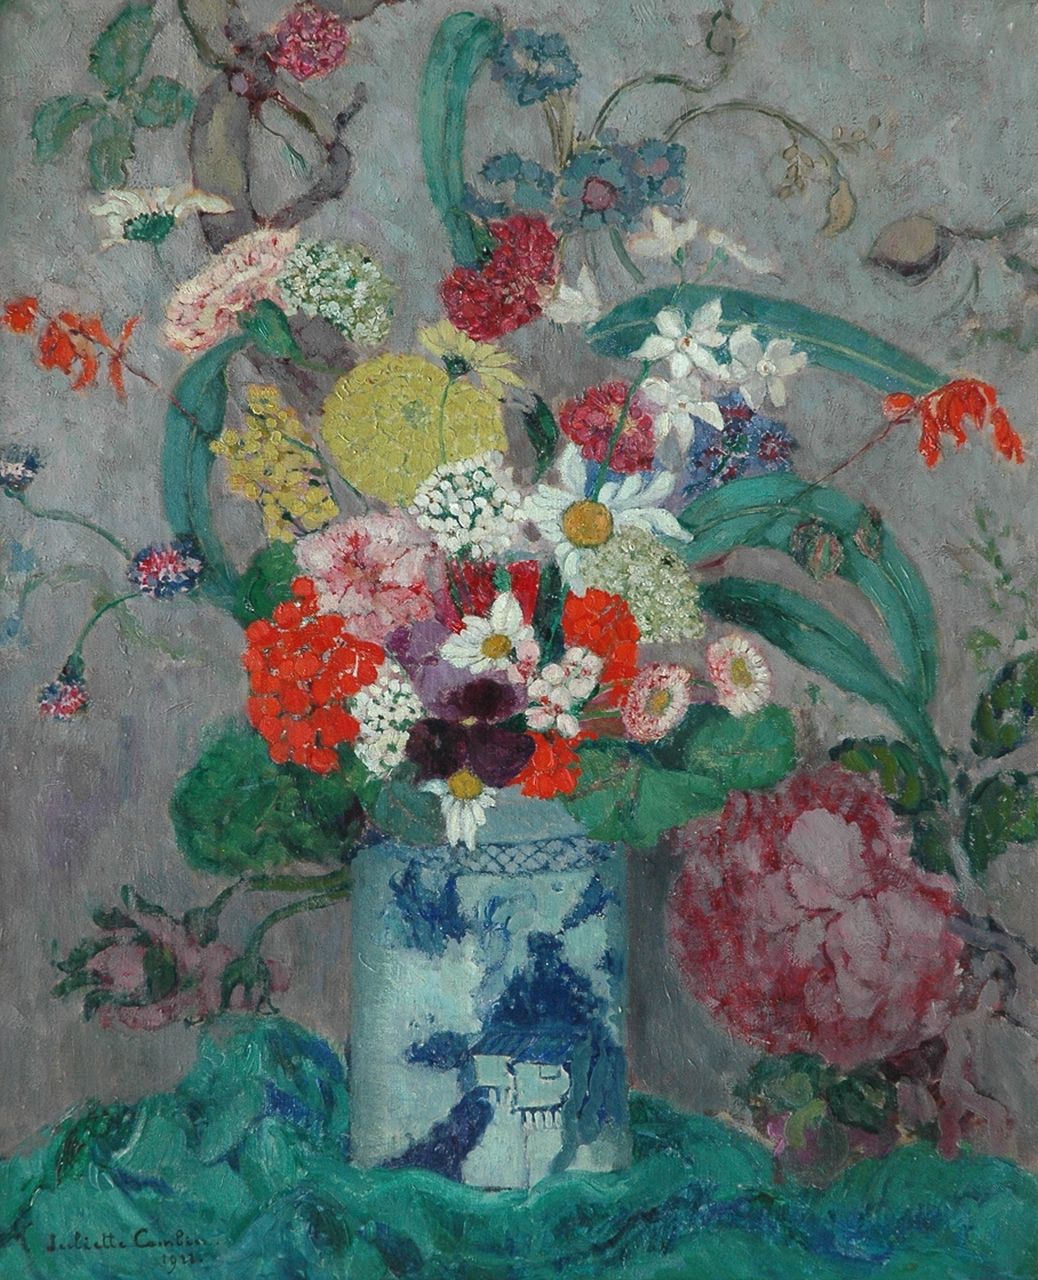 Cambier J.Z.  | 'Juliette' Ziane Cambier, A still life of flowers, oil on canvas 79.0 x 79.0 cm, signed l.r.